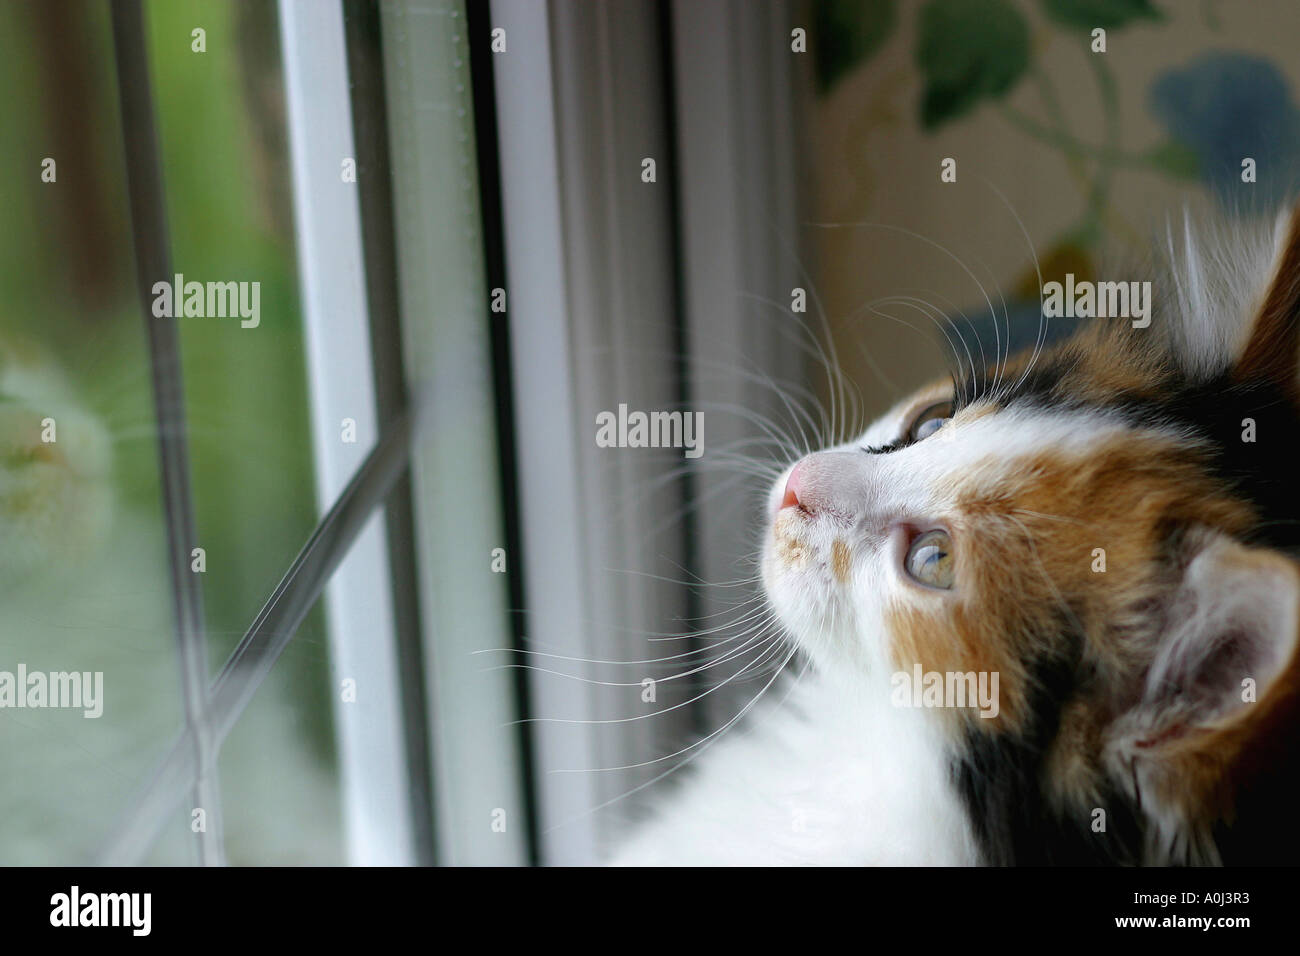 Close-up of a kitten standing against a window looking up Stock Photo